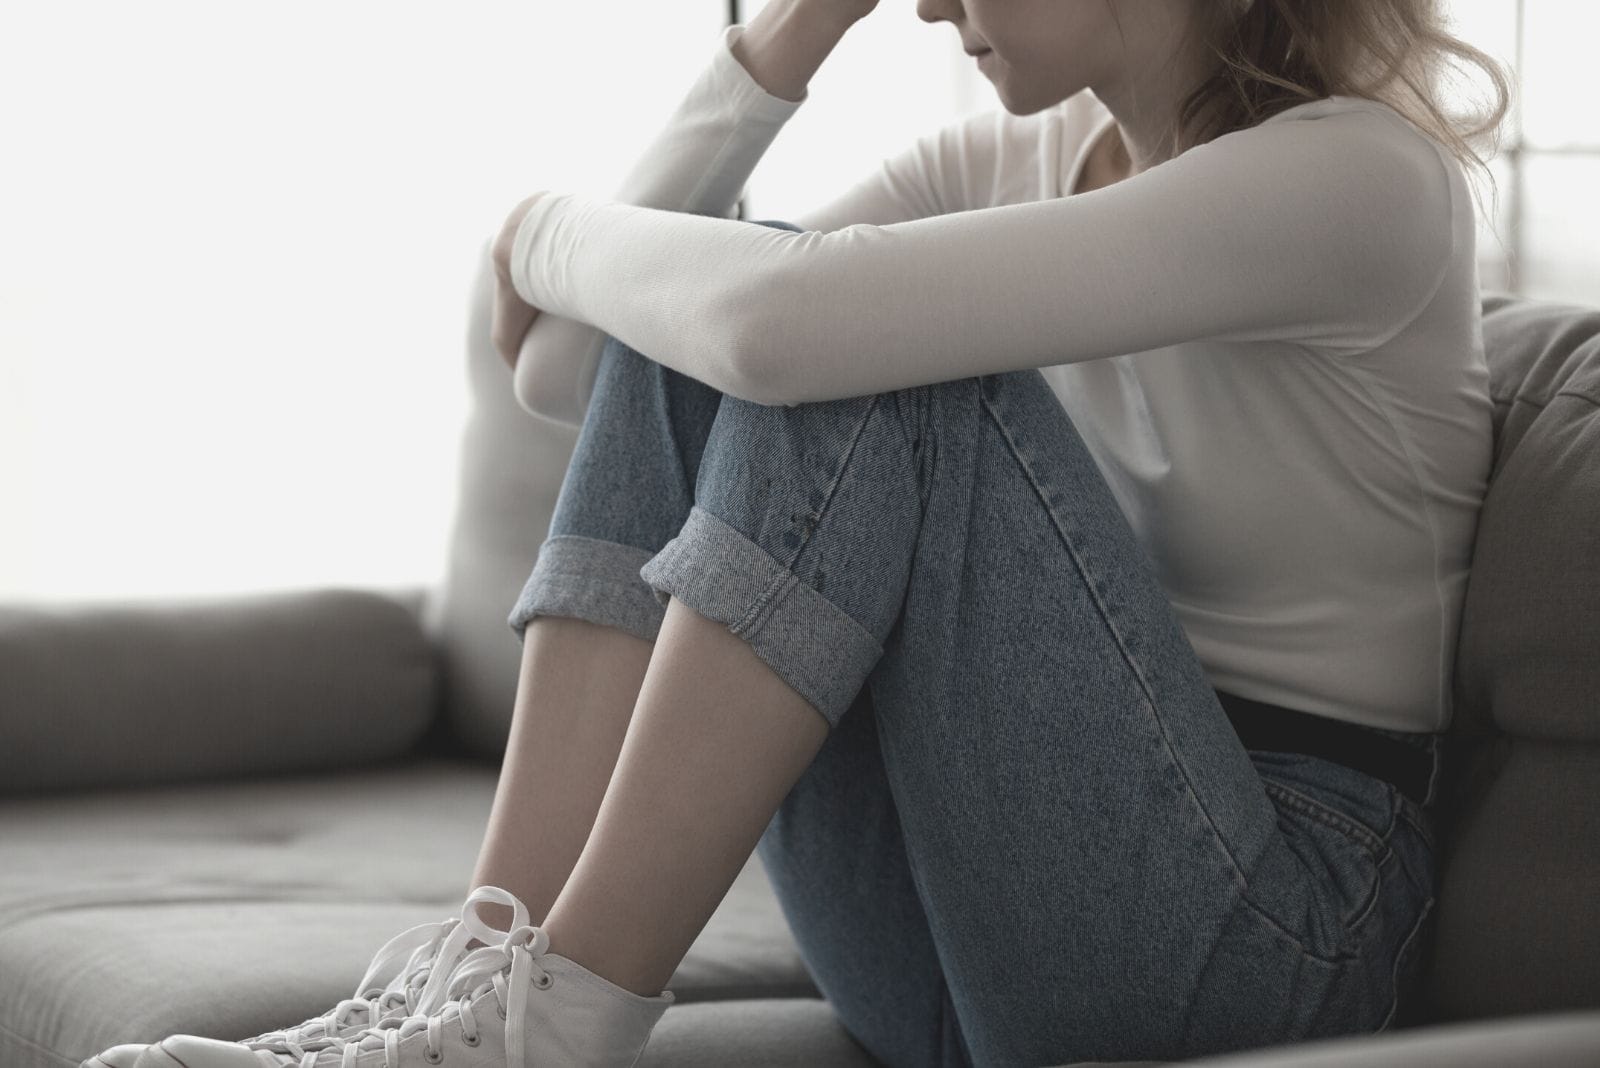 close up image of an upset woman sitting on the sofa with feet tucked in cropped image